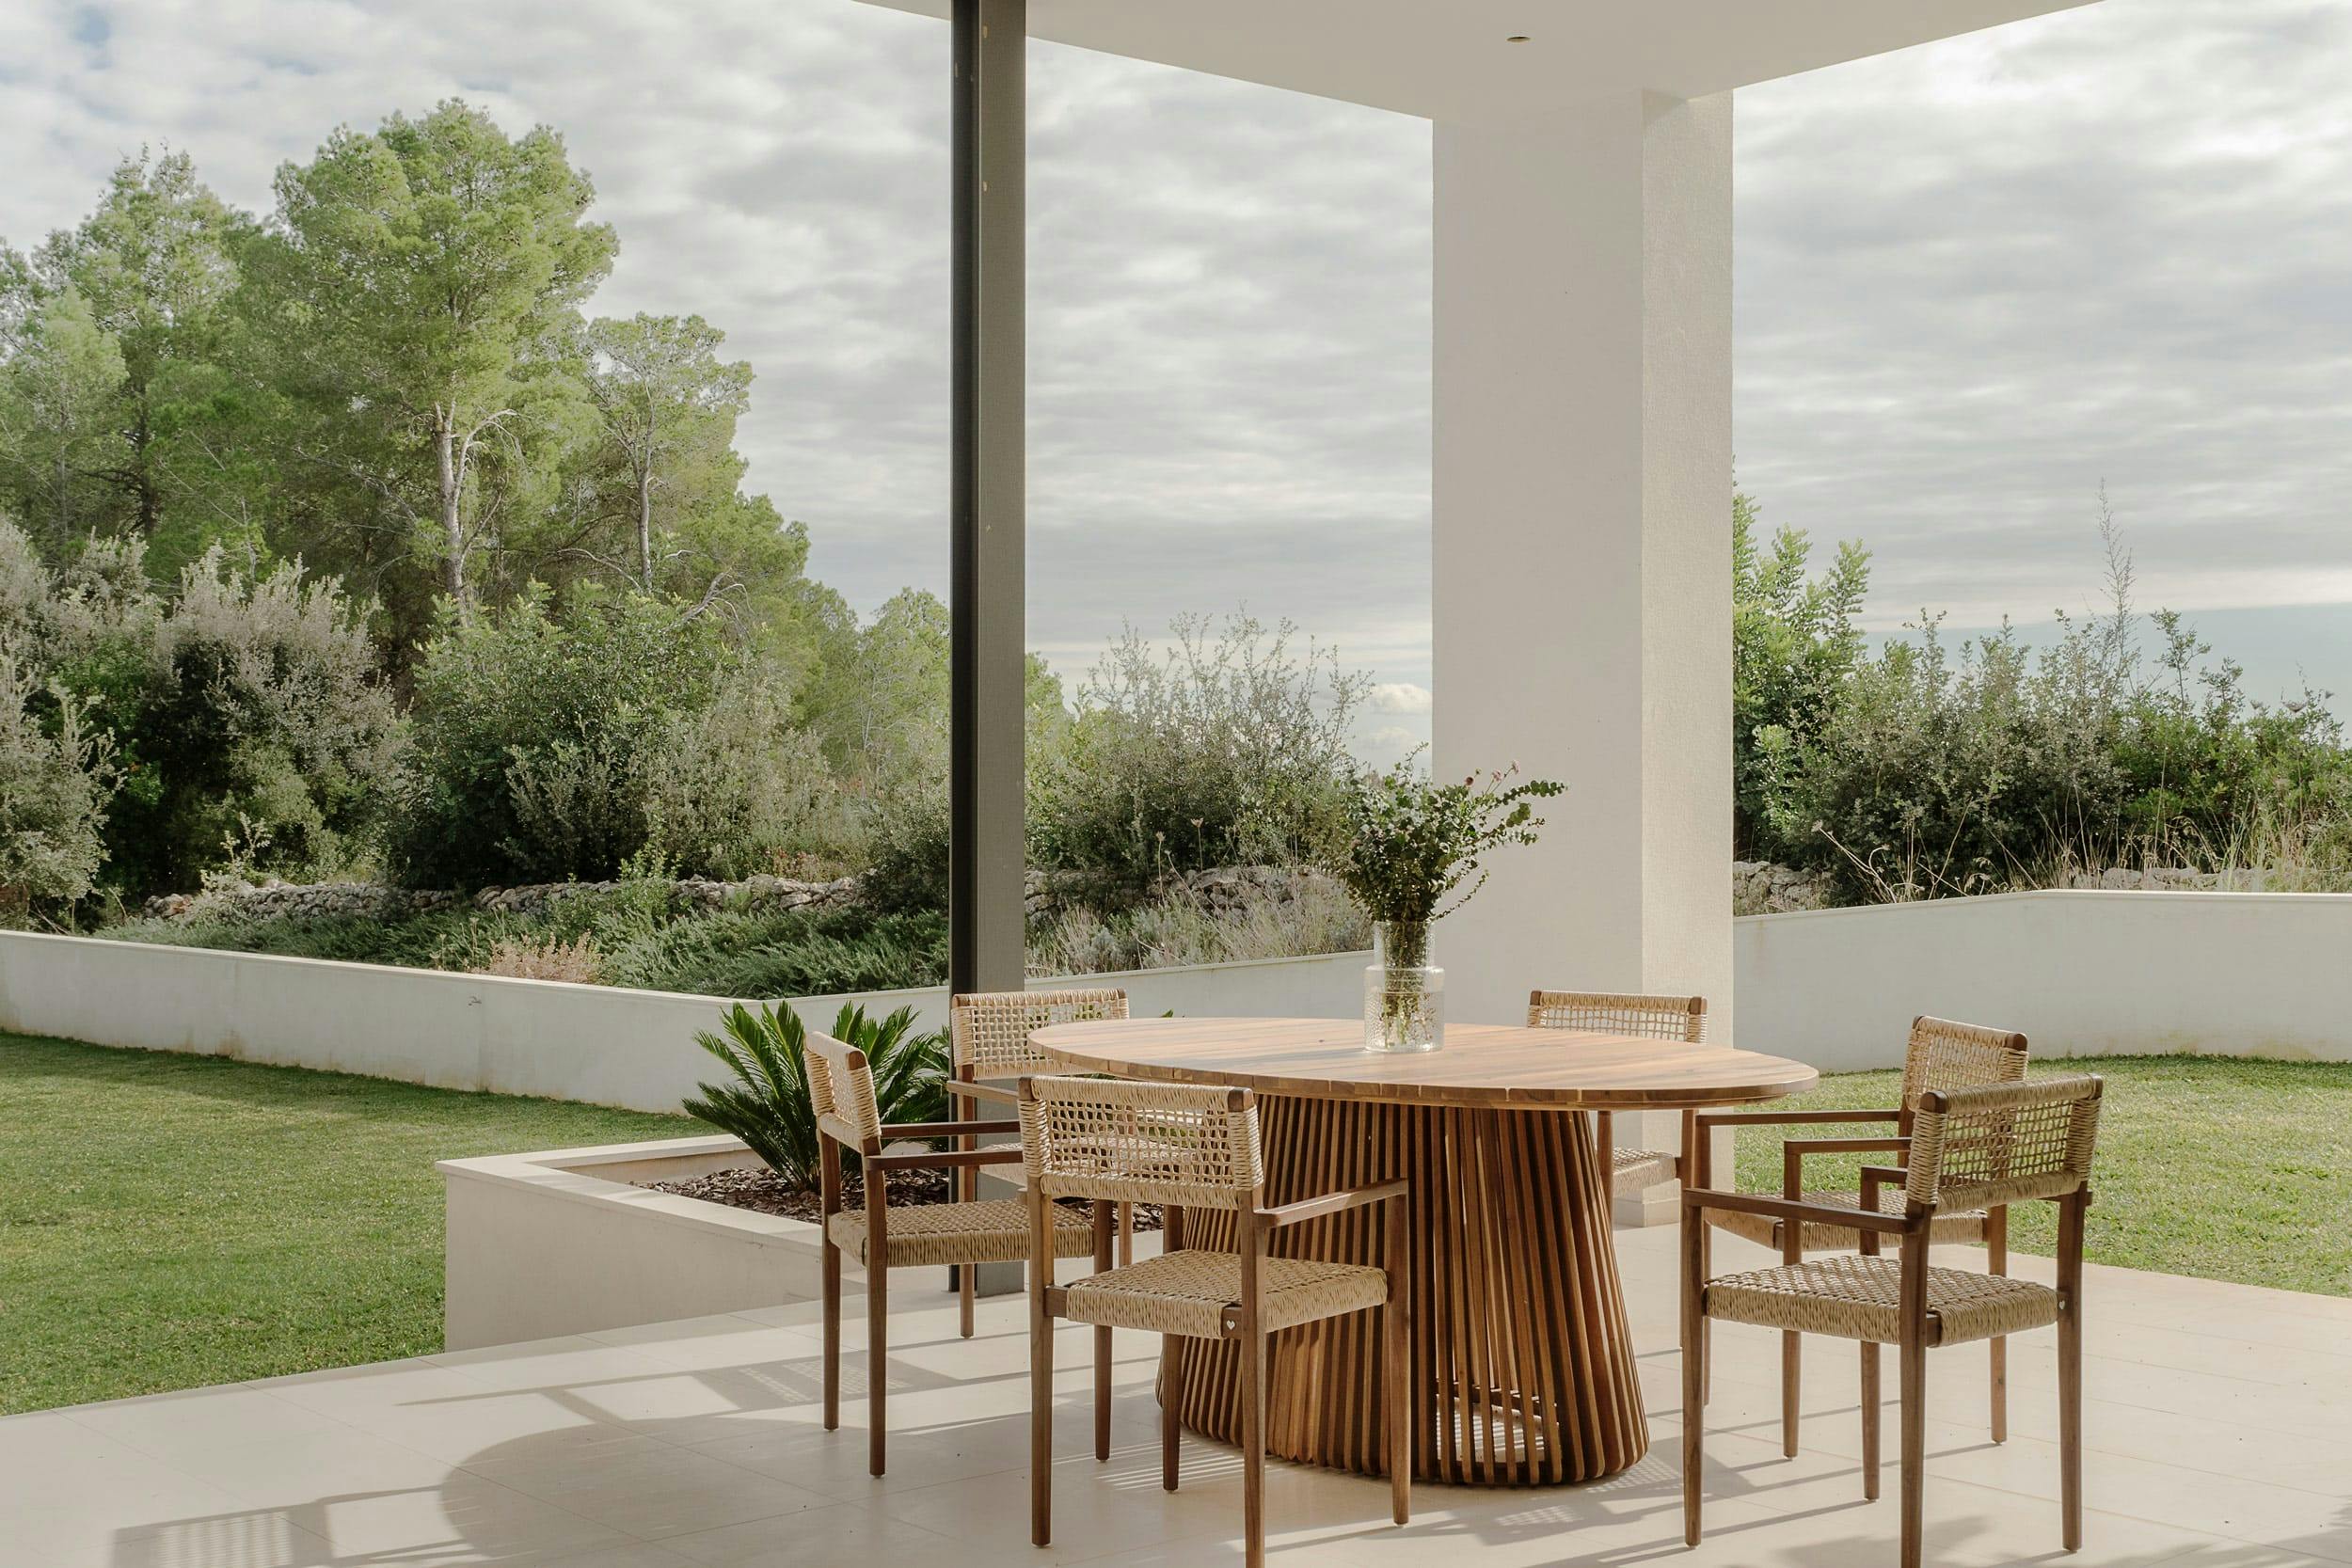 The image features a large glass window with a view of a patio area, which is furnished with a wooden dining table and chairs. The table is surrounded by four chairs, and there are two potted plants placed on the table and the patio.